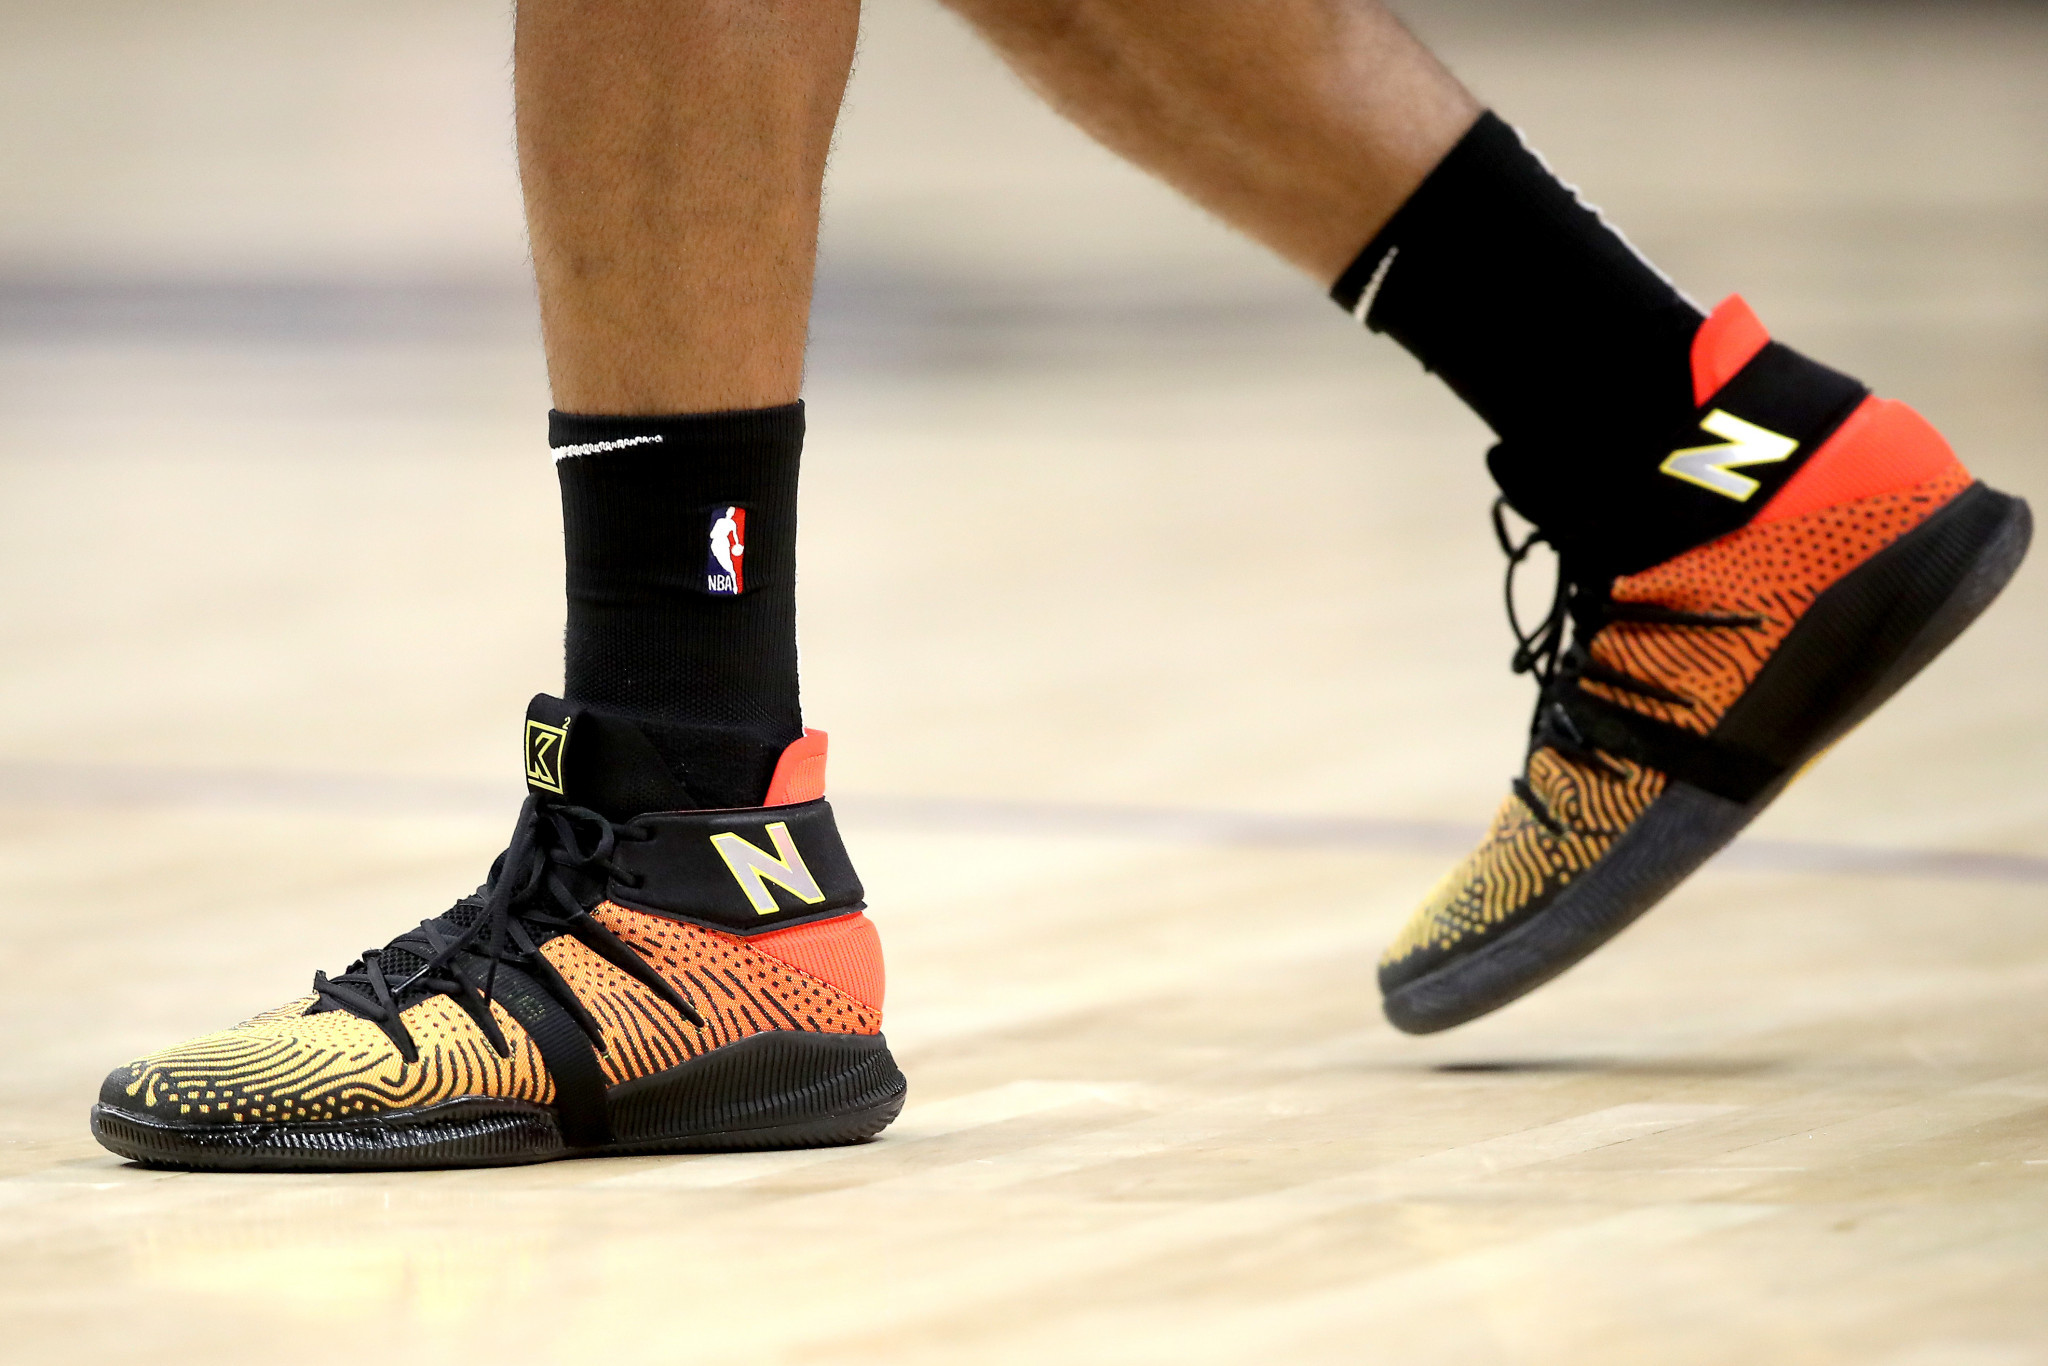 New Balance works with organisations including the NBA ©Getty Images